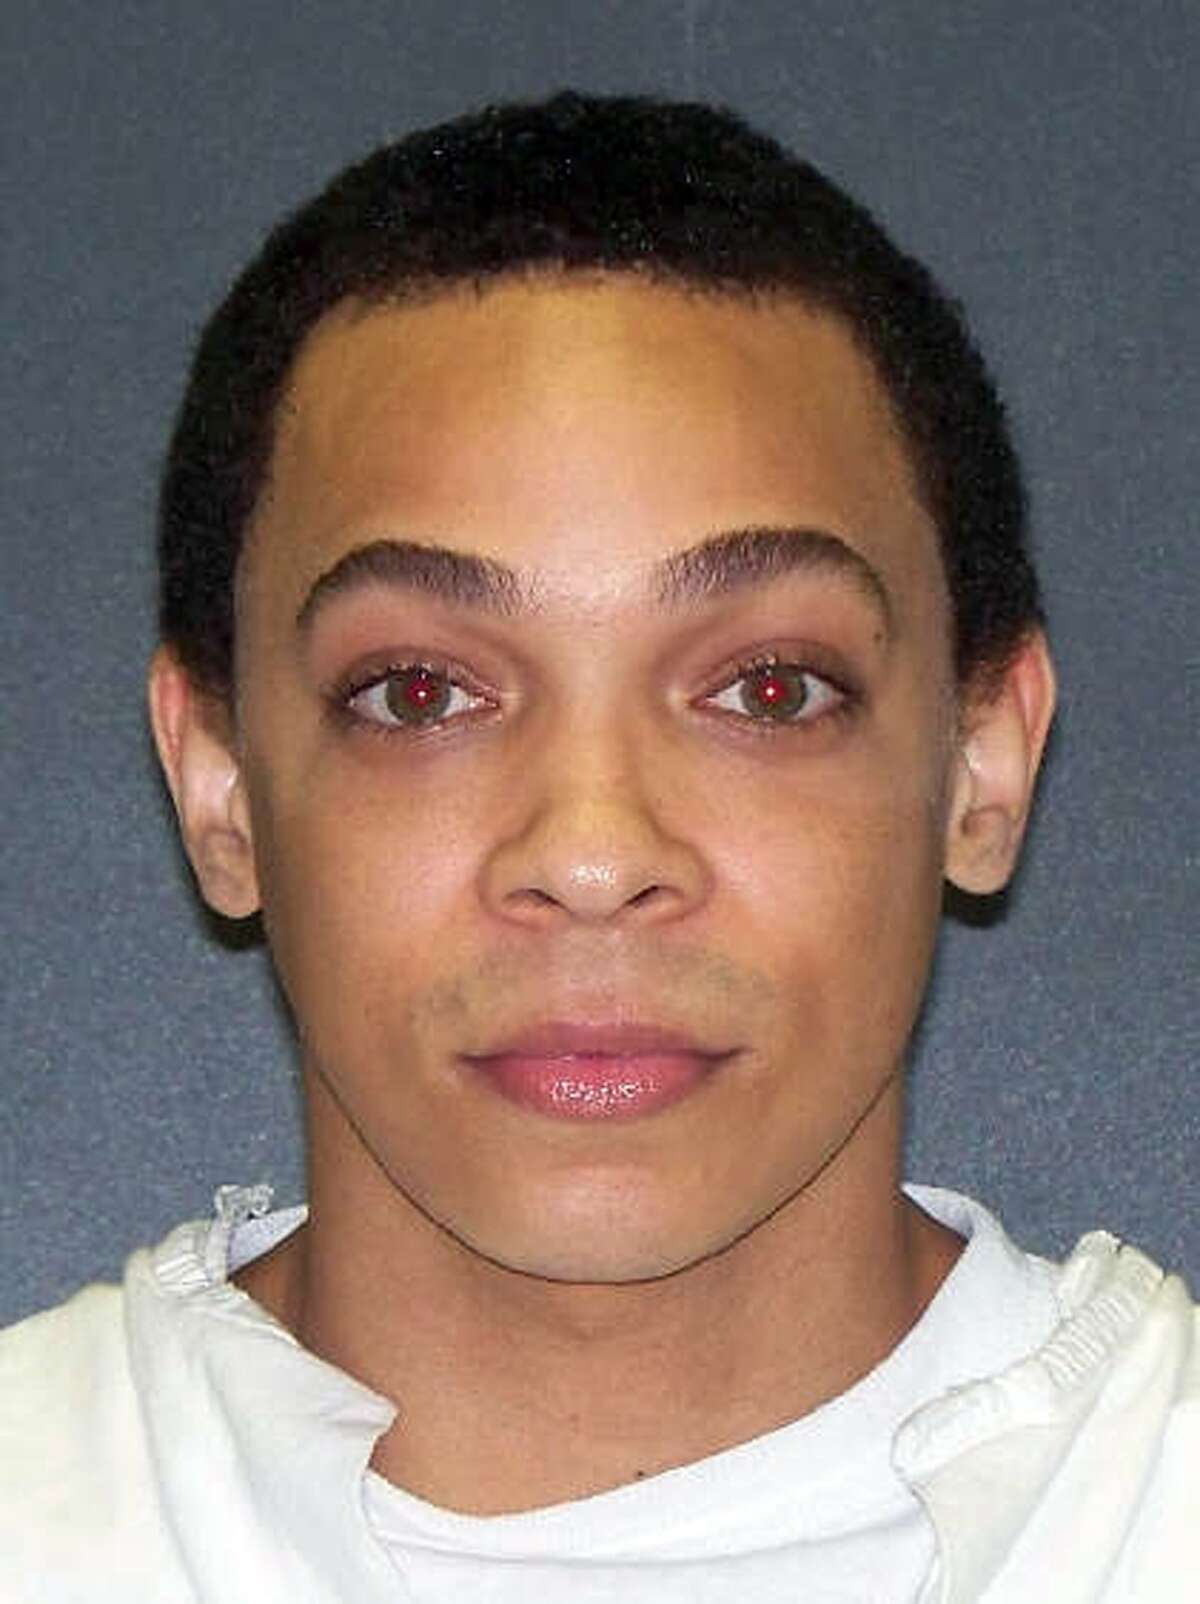 Anthony Haynes, 33, was granted a stay of execution on Thursday, Oct. 18. 2012, for killing an off-duty Houston police sergeant.